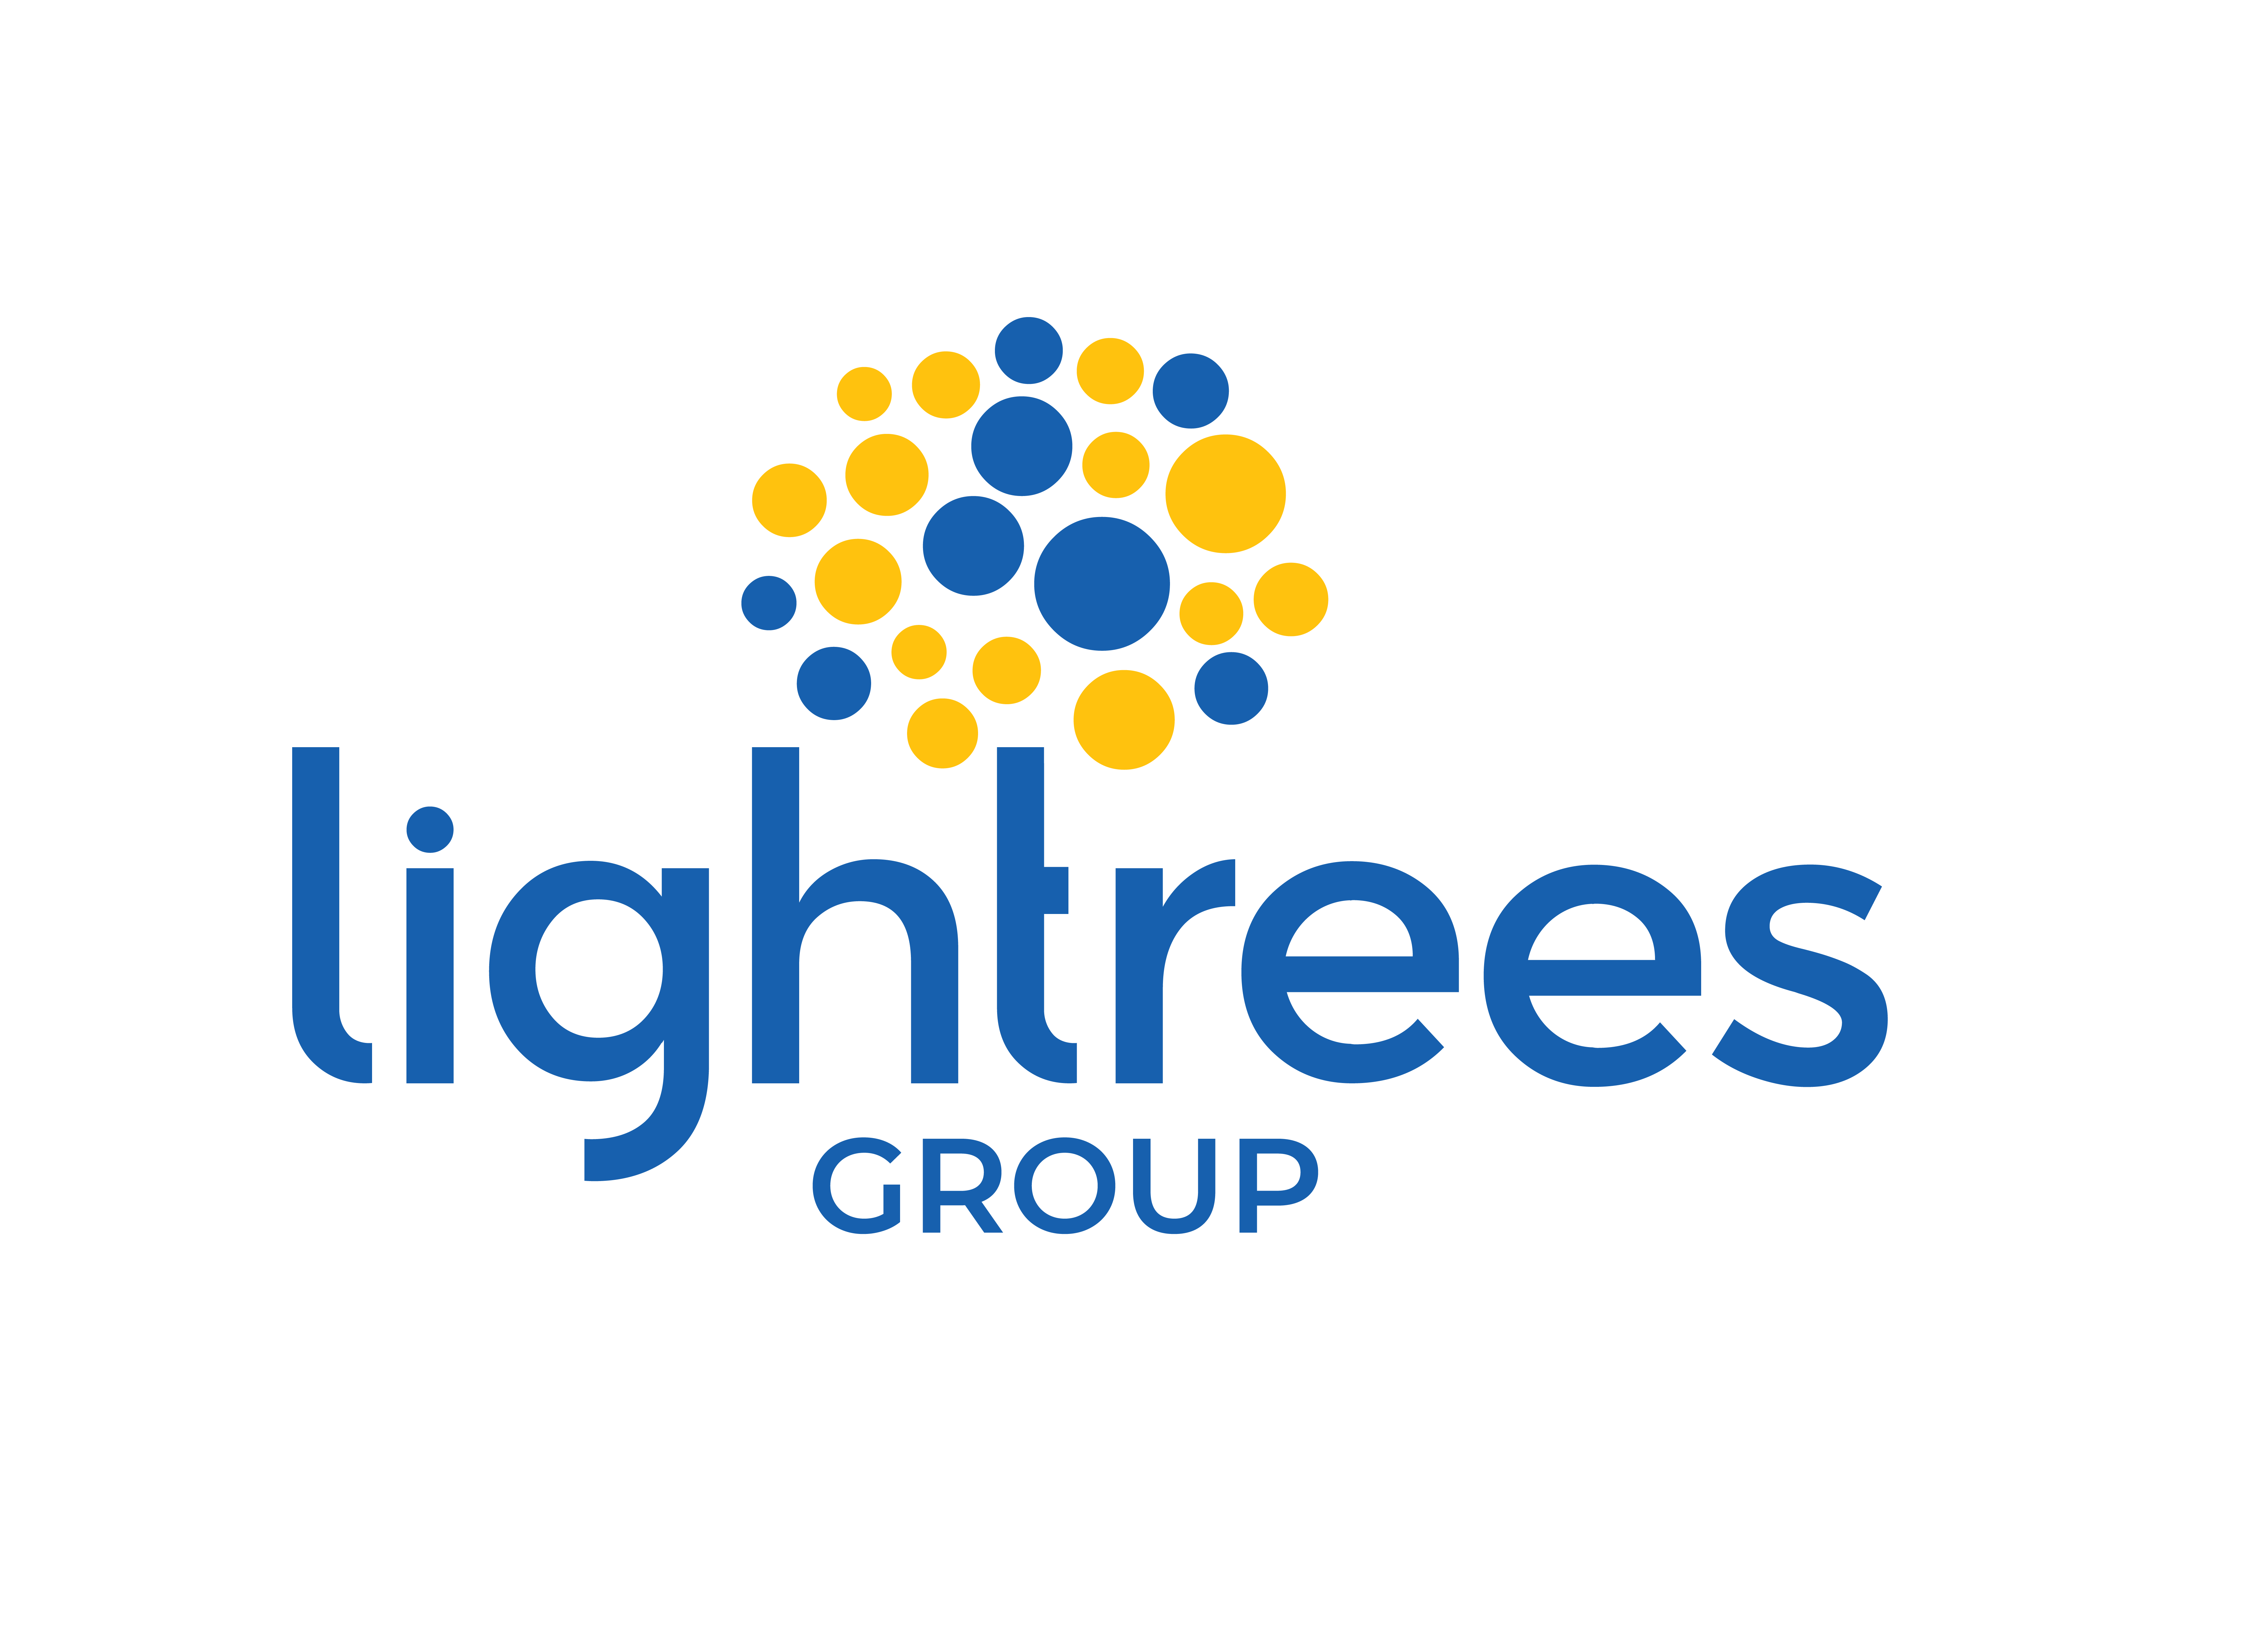 Copy of Lightrees Group Square v3. 21.10.21